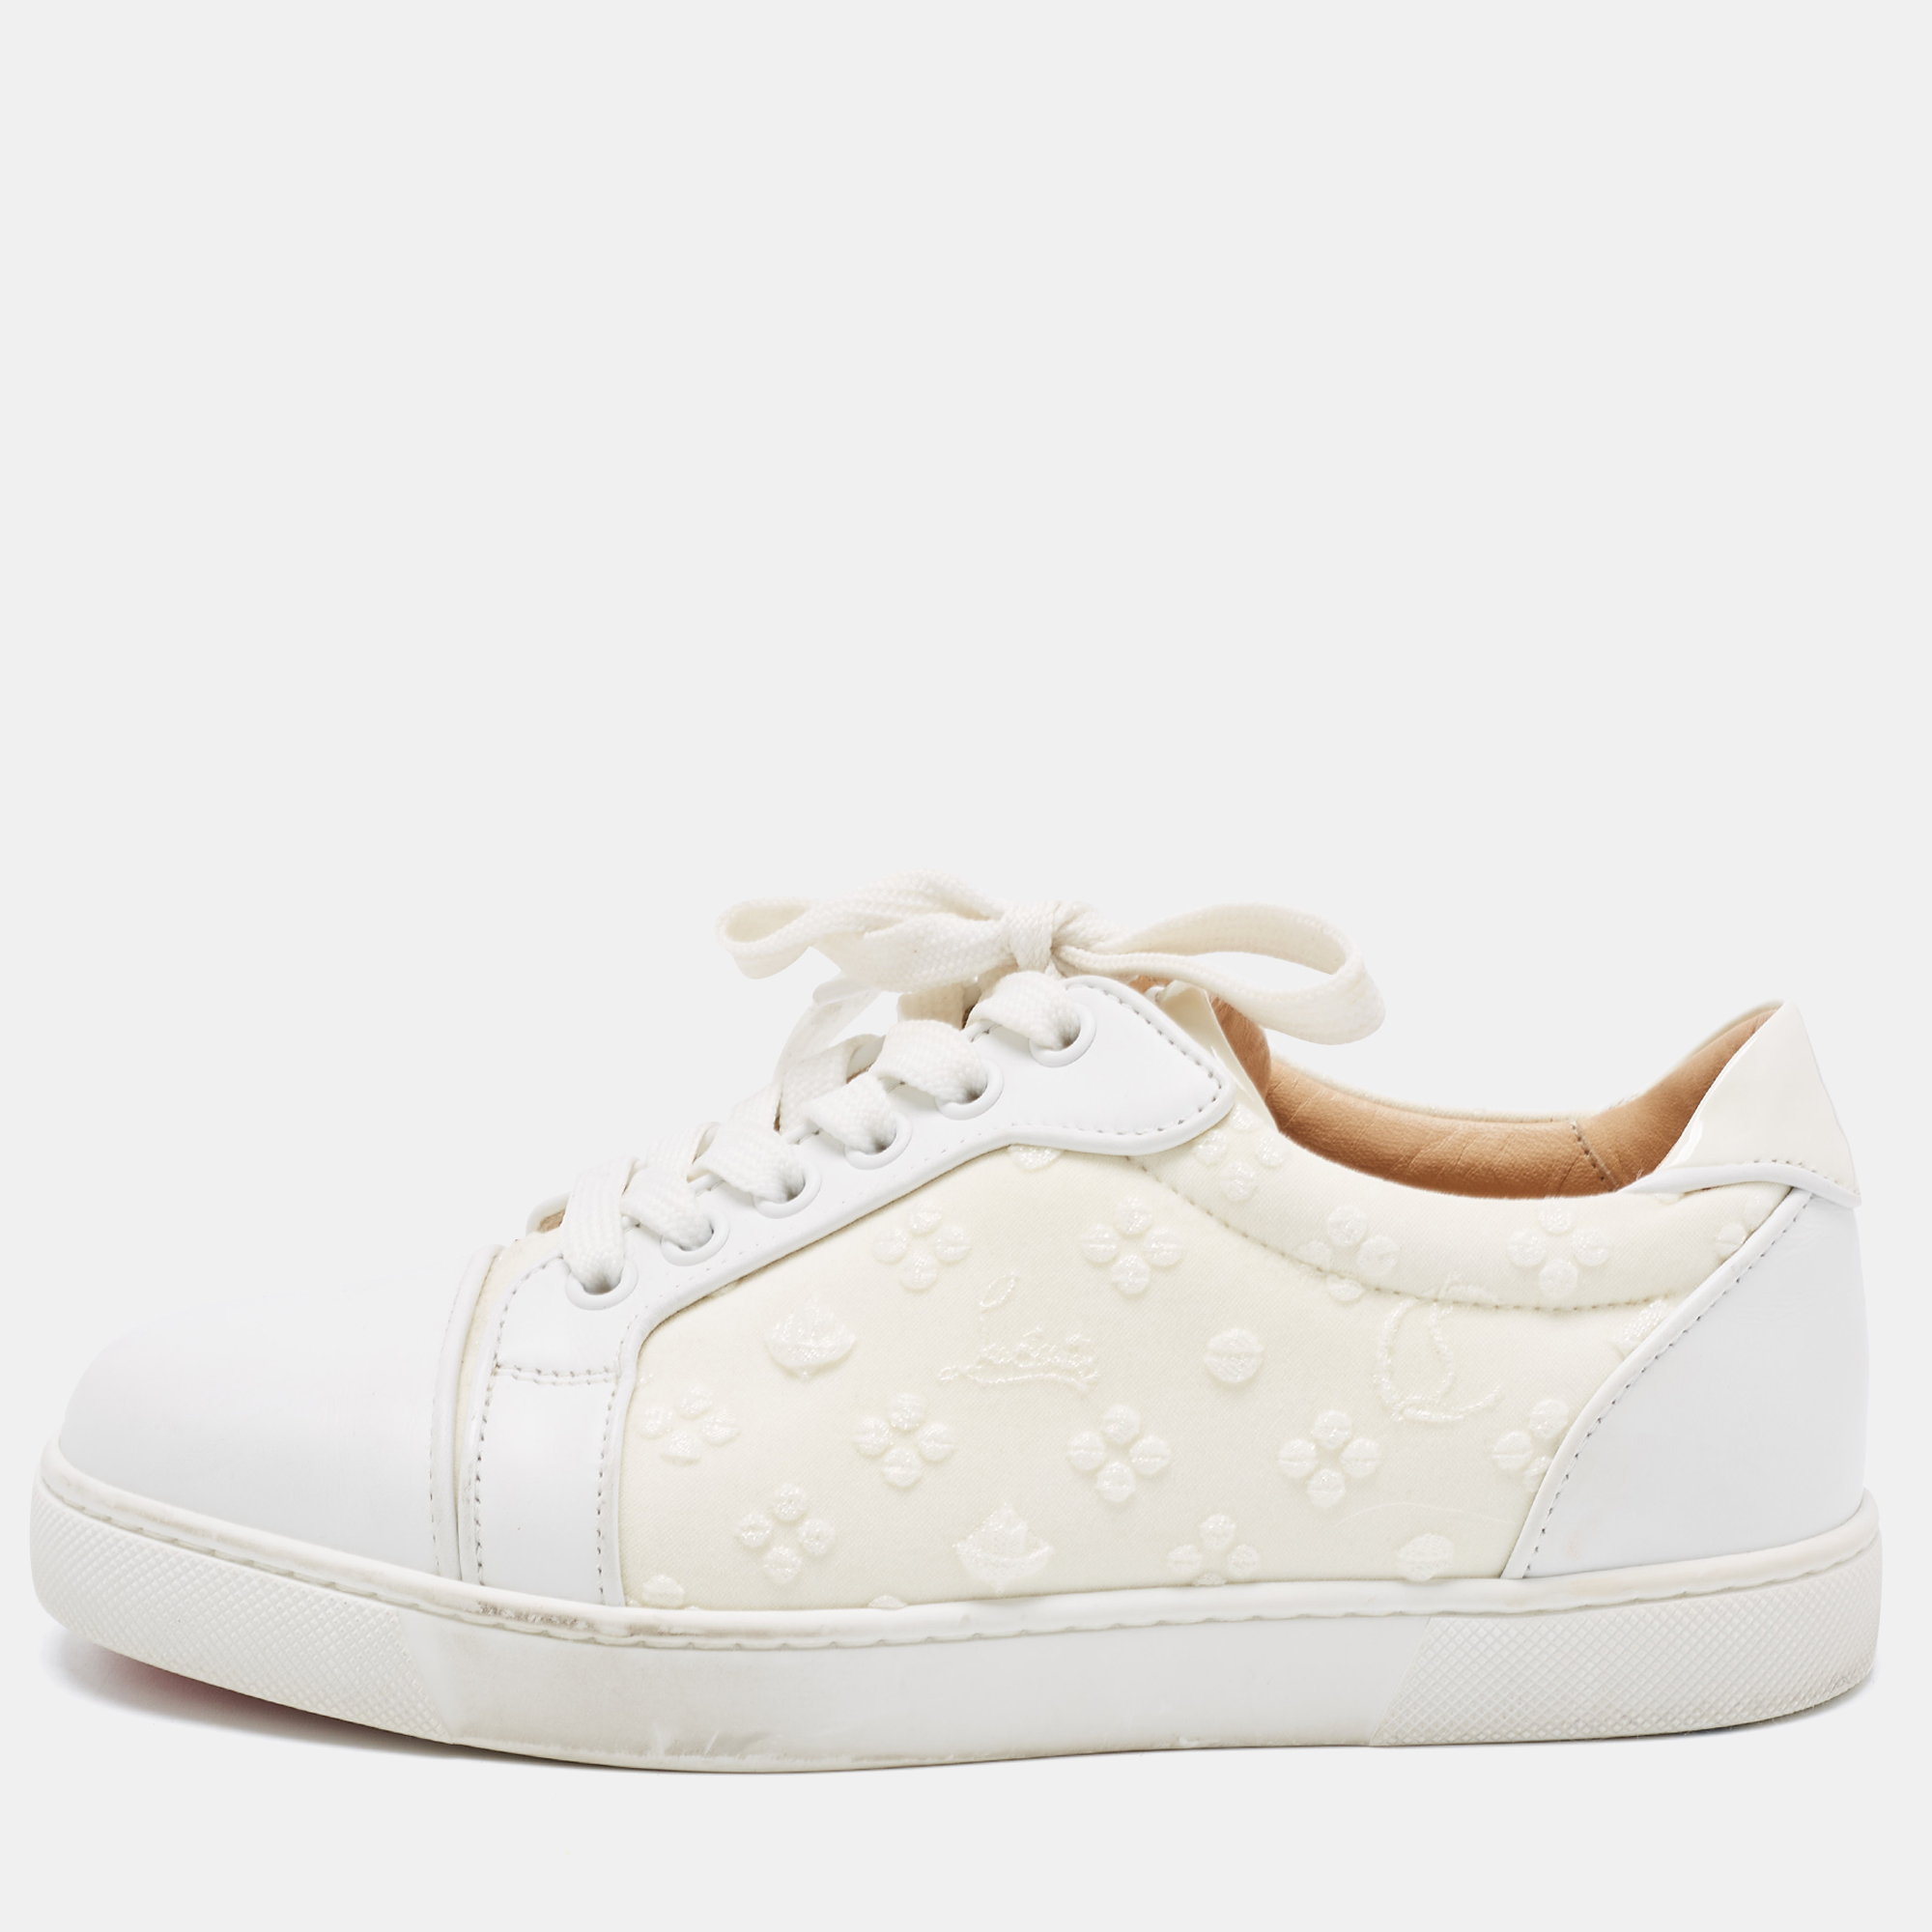 Christian louboutin white fabric and leather vieira orlato trainers sneakers size 36.5